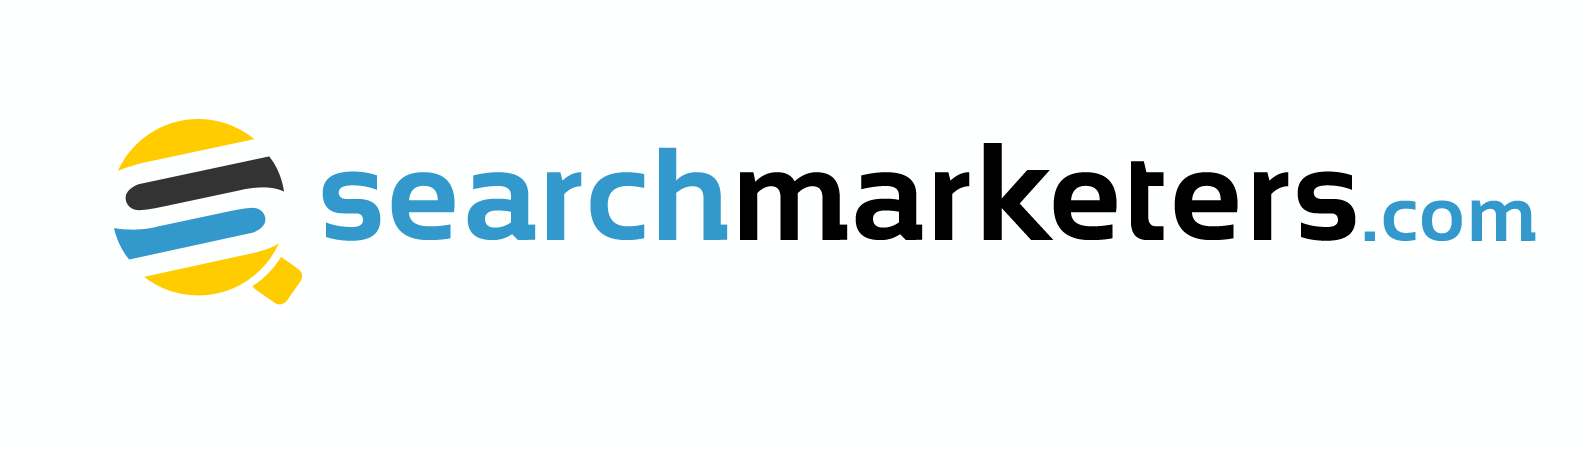 SearchMarketers.com